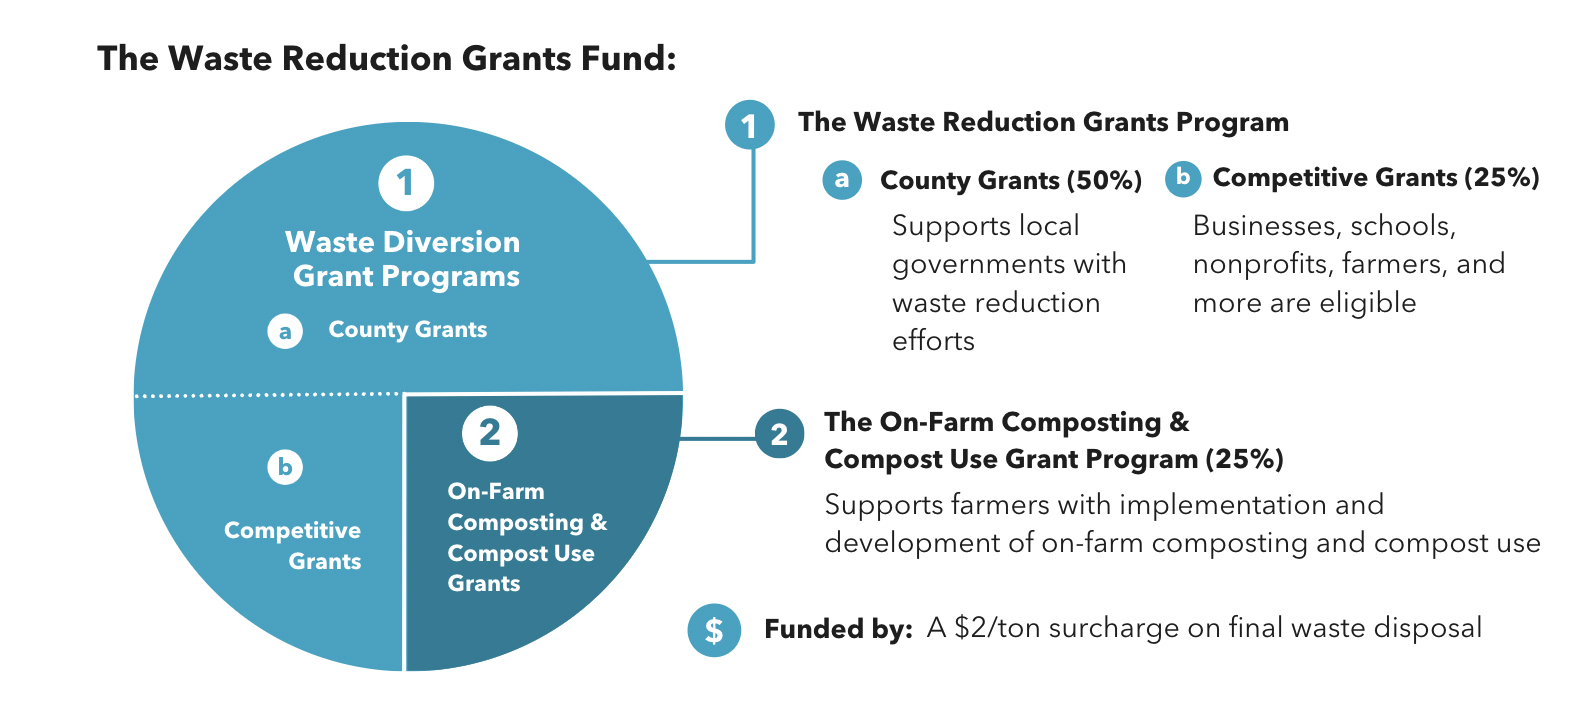 Graphic from the factsheet depicting the 25-25-50 % split of funds between the three grant programs